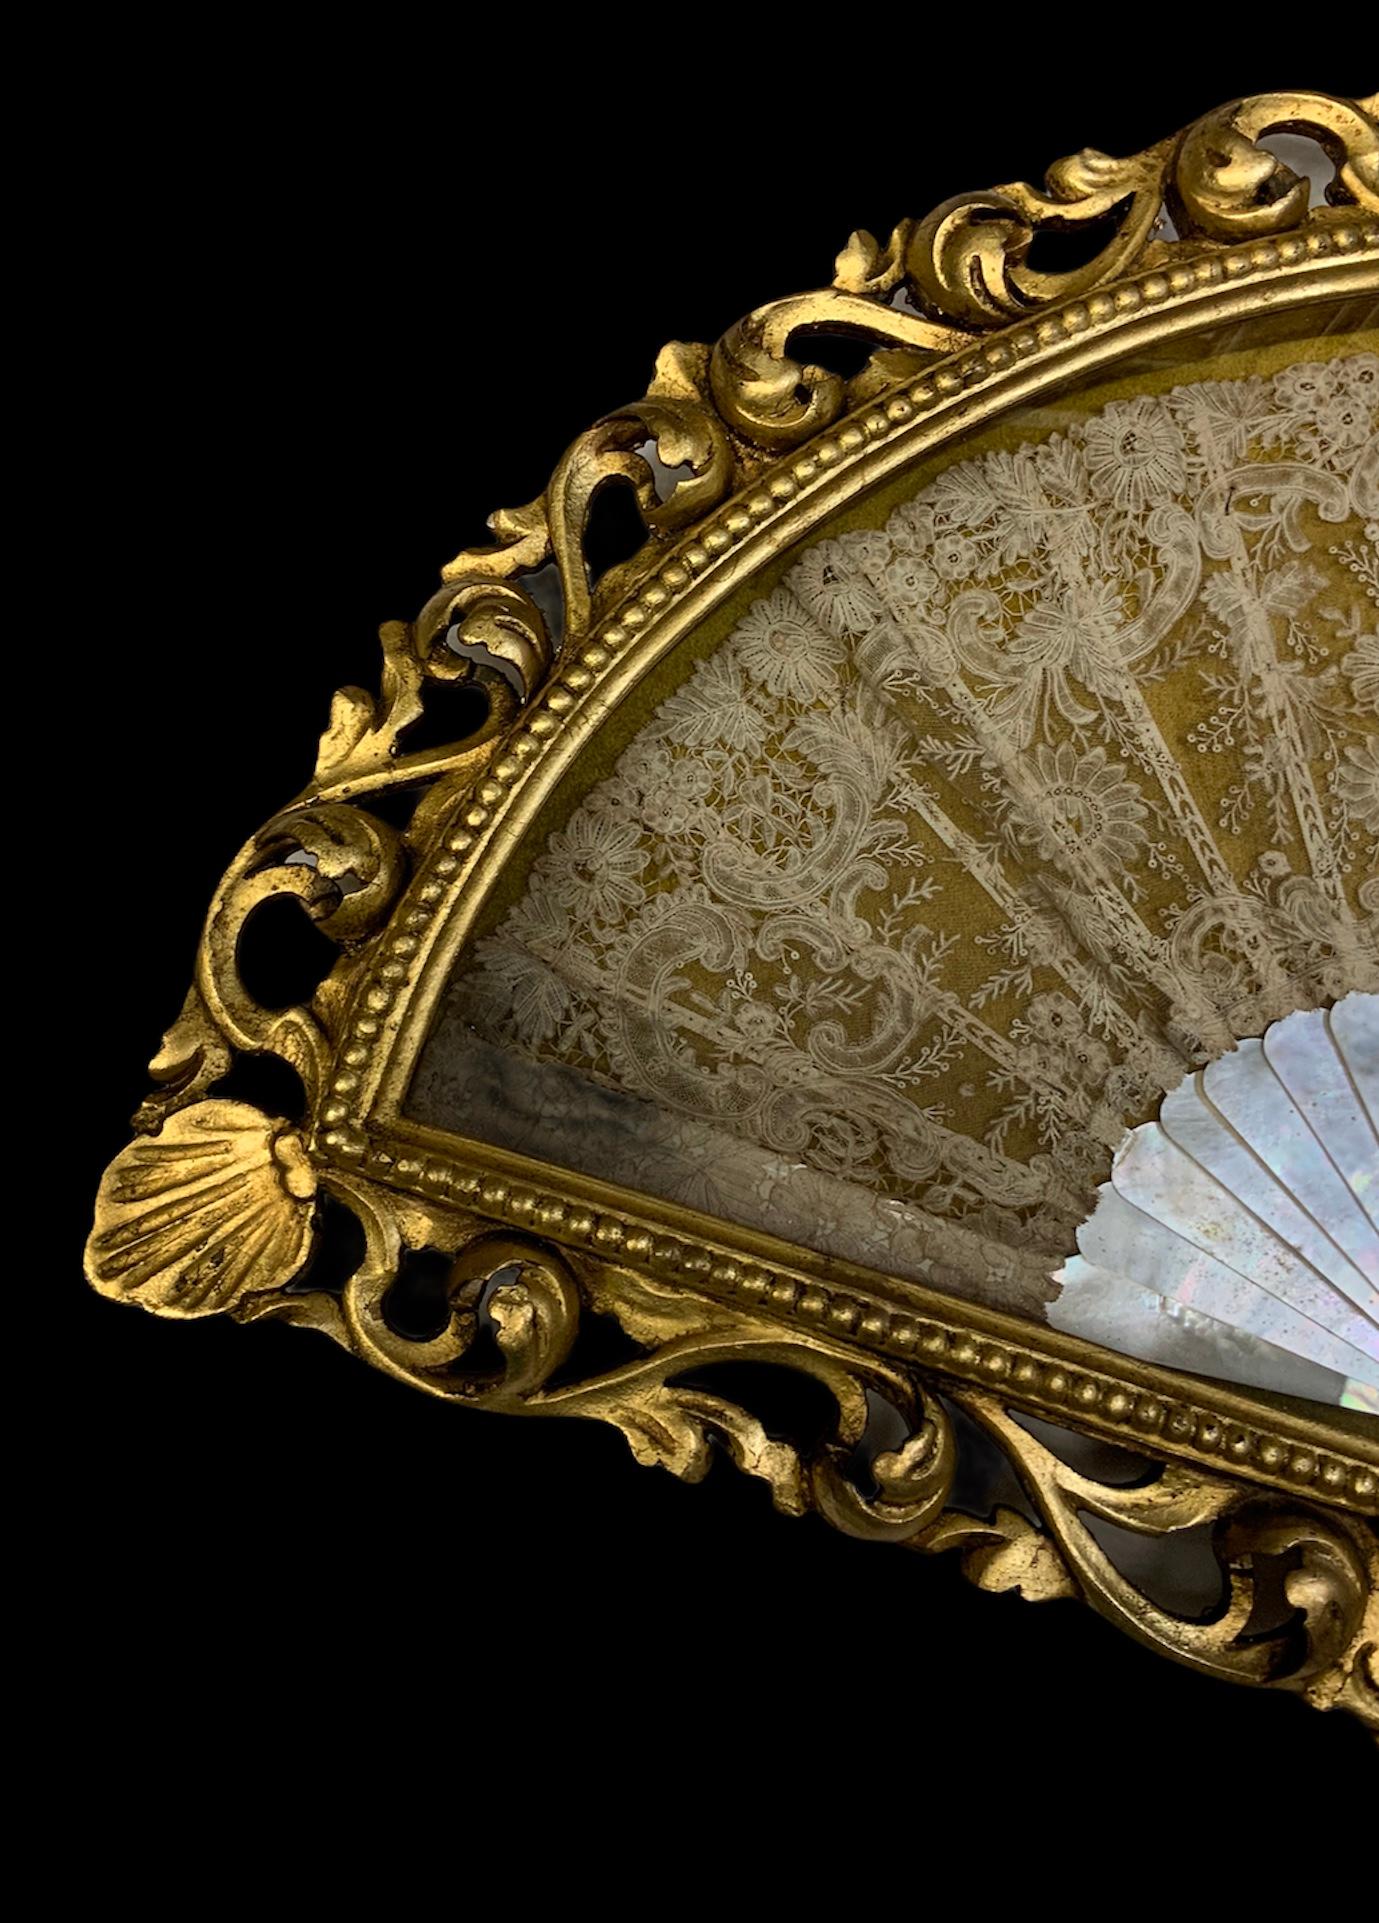 This is a delicate mother of pearl sticks and Lace fan enclosed in a fan shaped gilt wood & glass display. The border of the box is adorned by golden beading. Over this border is highlighted a carved decoration made of scrolls of acanthus leaves